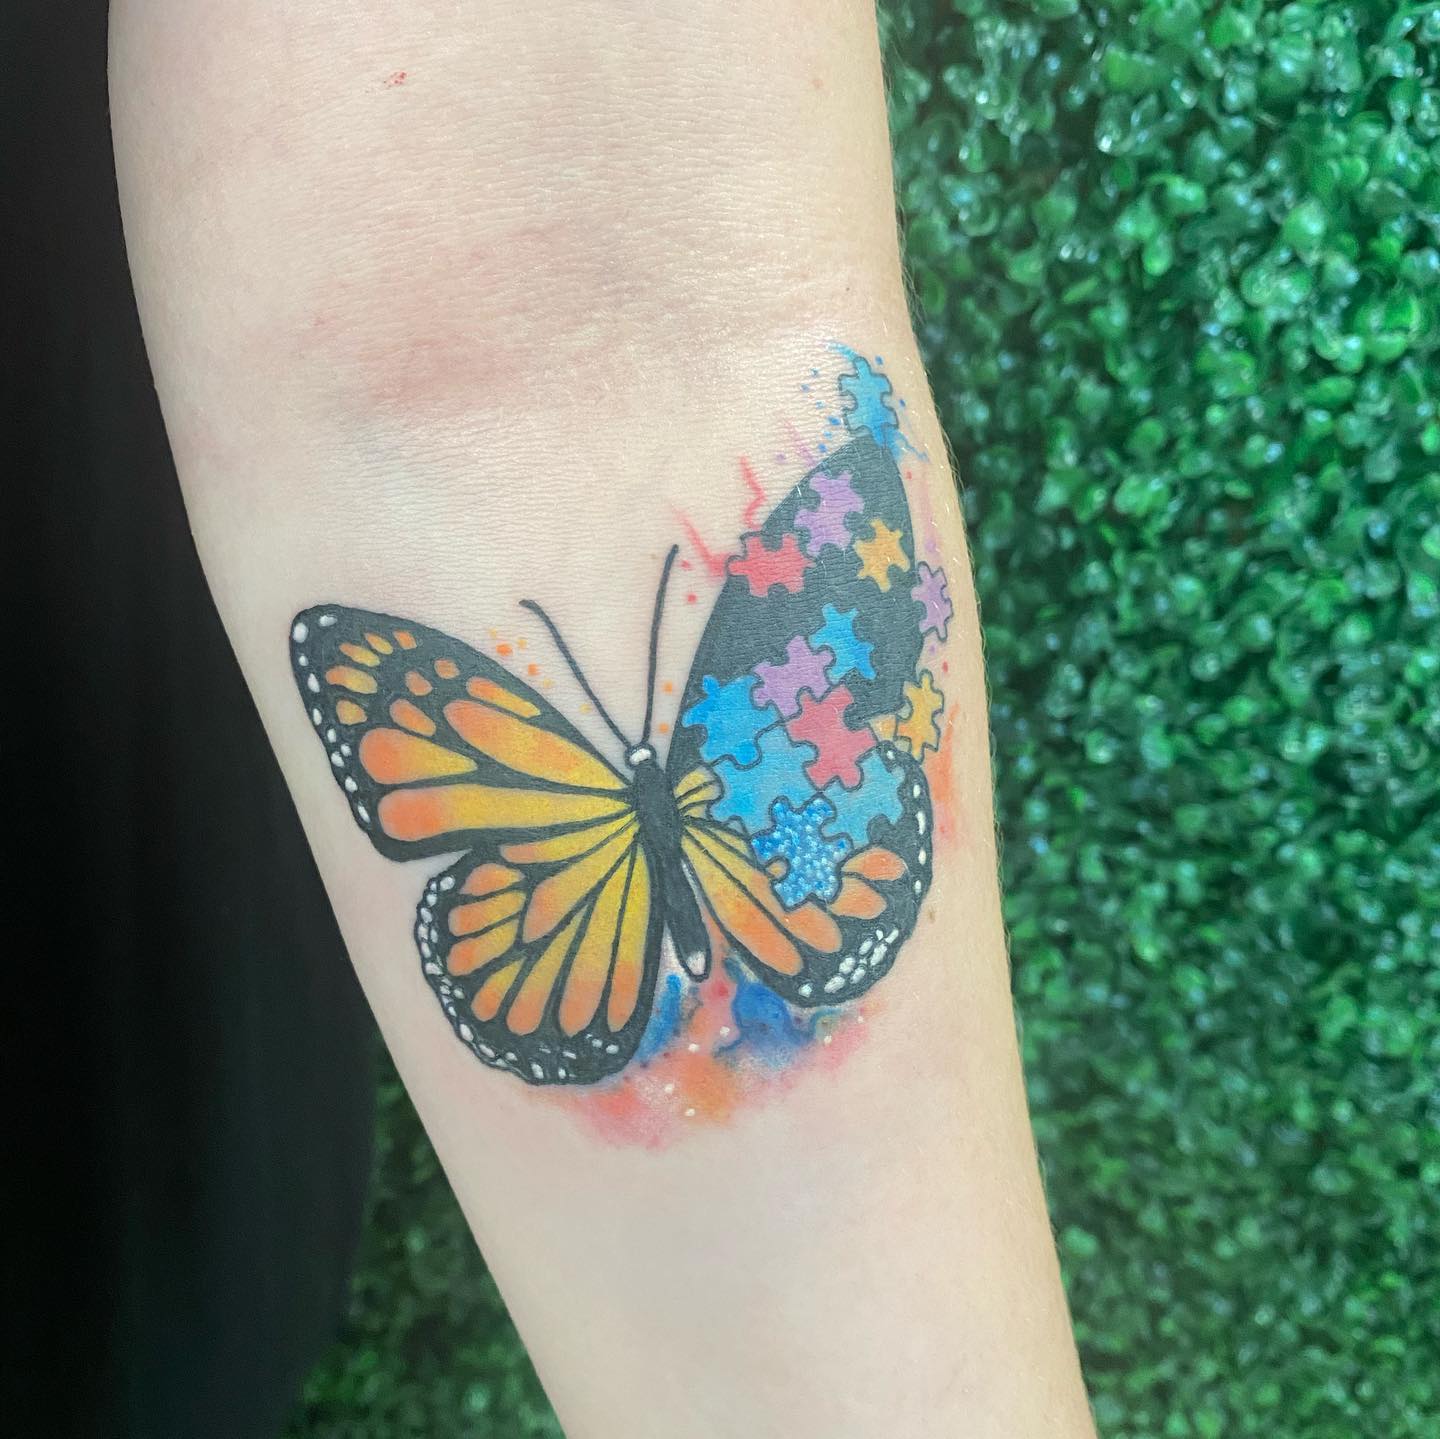 Butterflies symbolize your new beginnings and a positive era. Show off this autism tattoo concept and know that it is a personal yet gorgeous piece to go for.